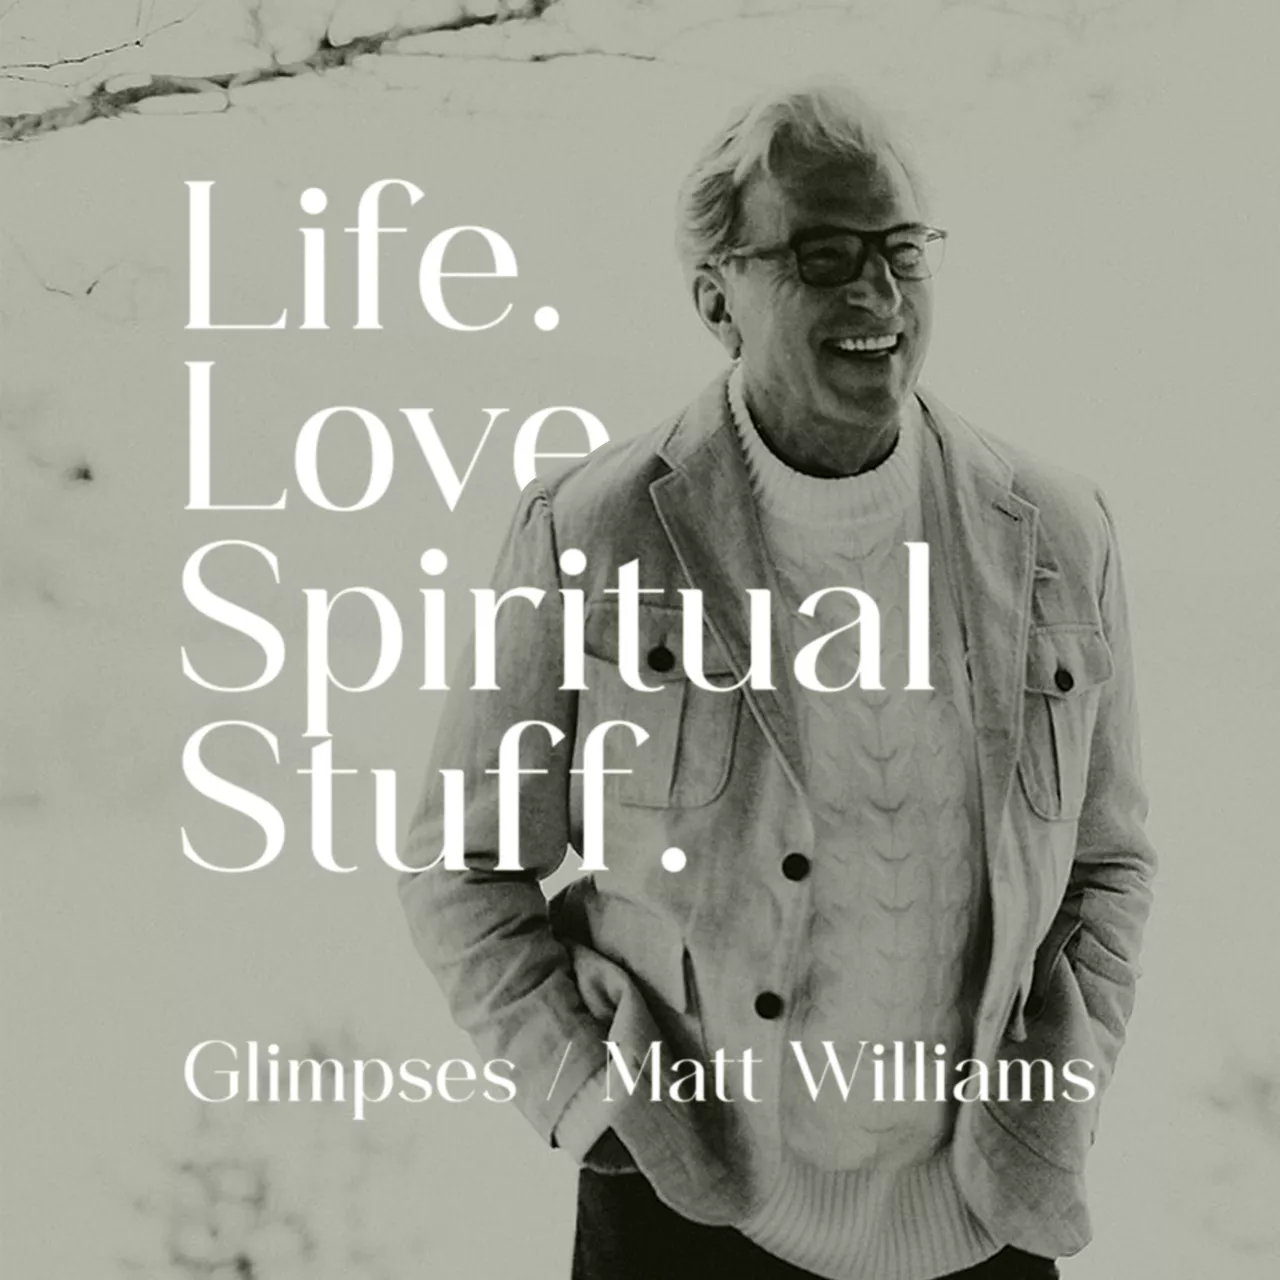 Matt Williams, Legendary Television Writer and Producer, Launches “Glimpses” img#2